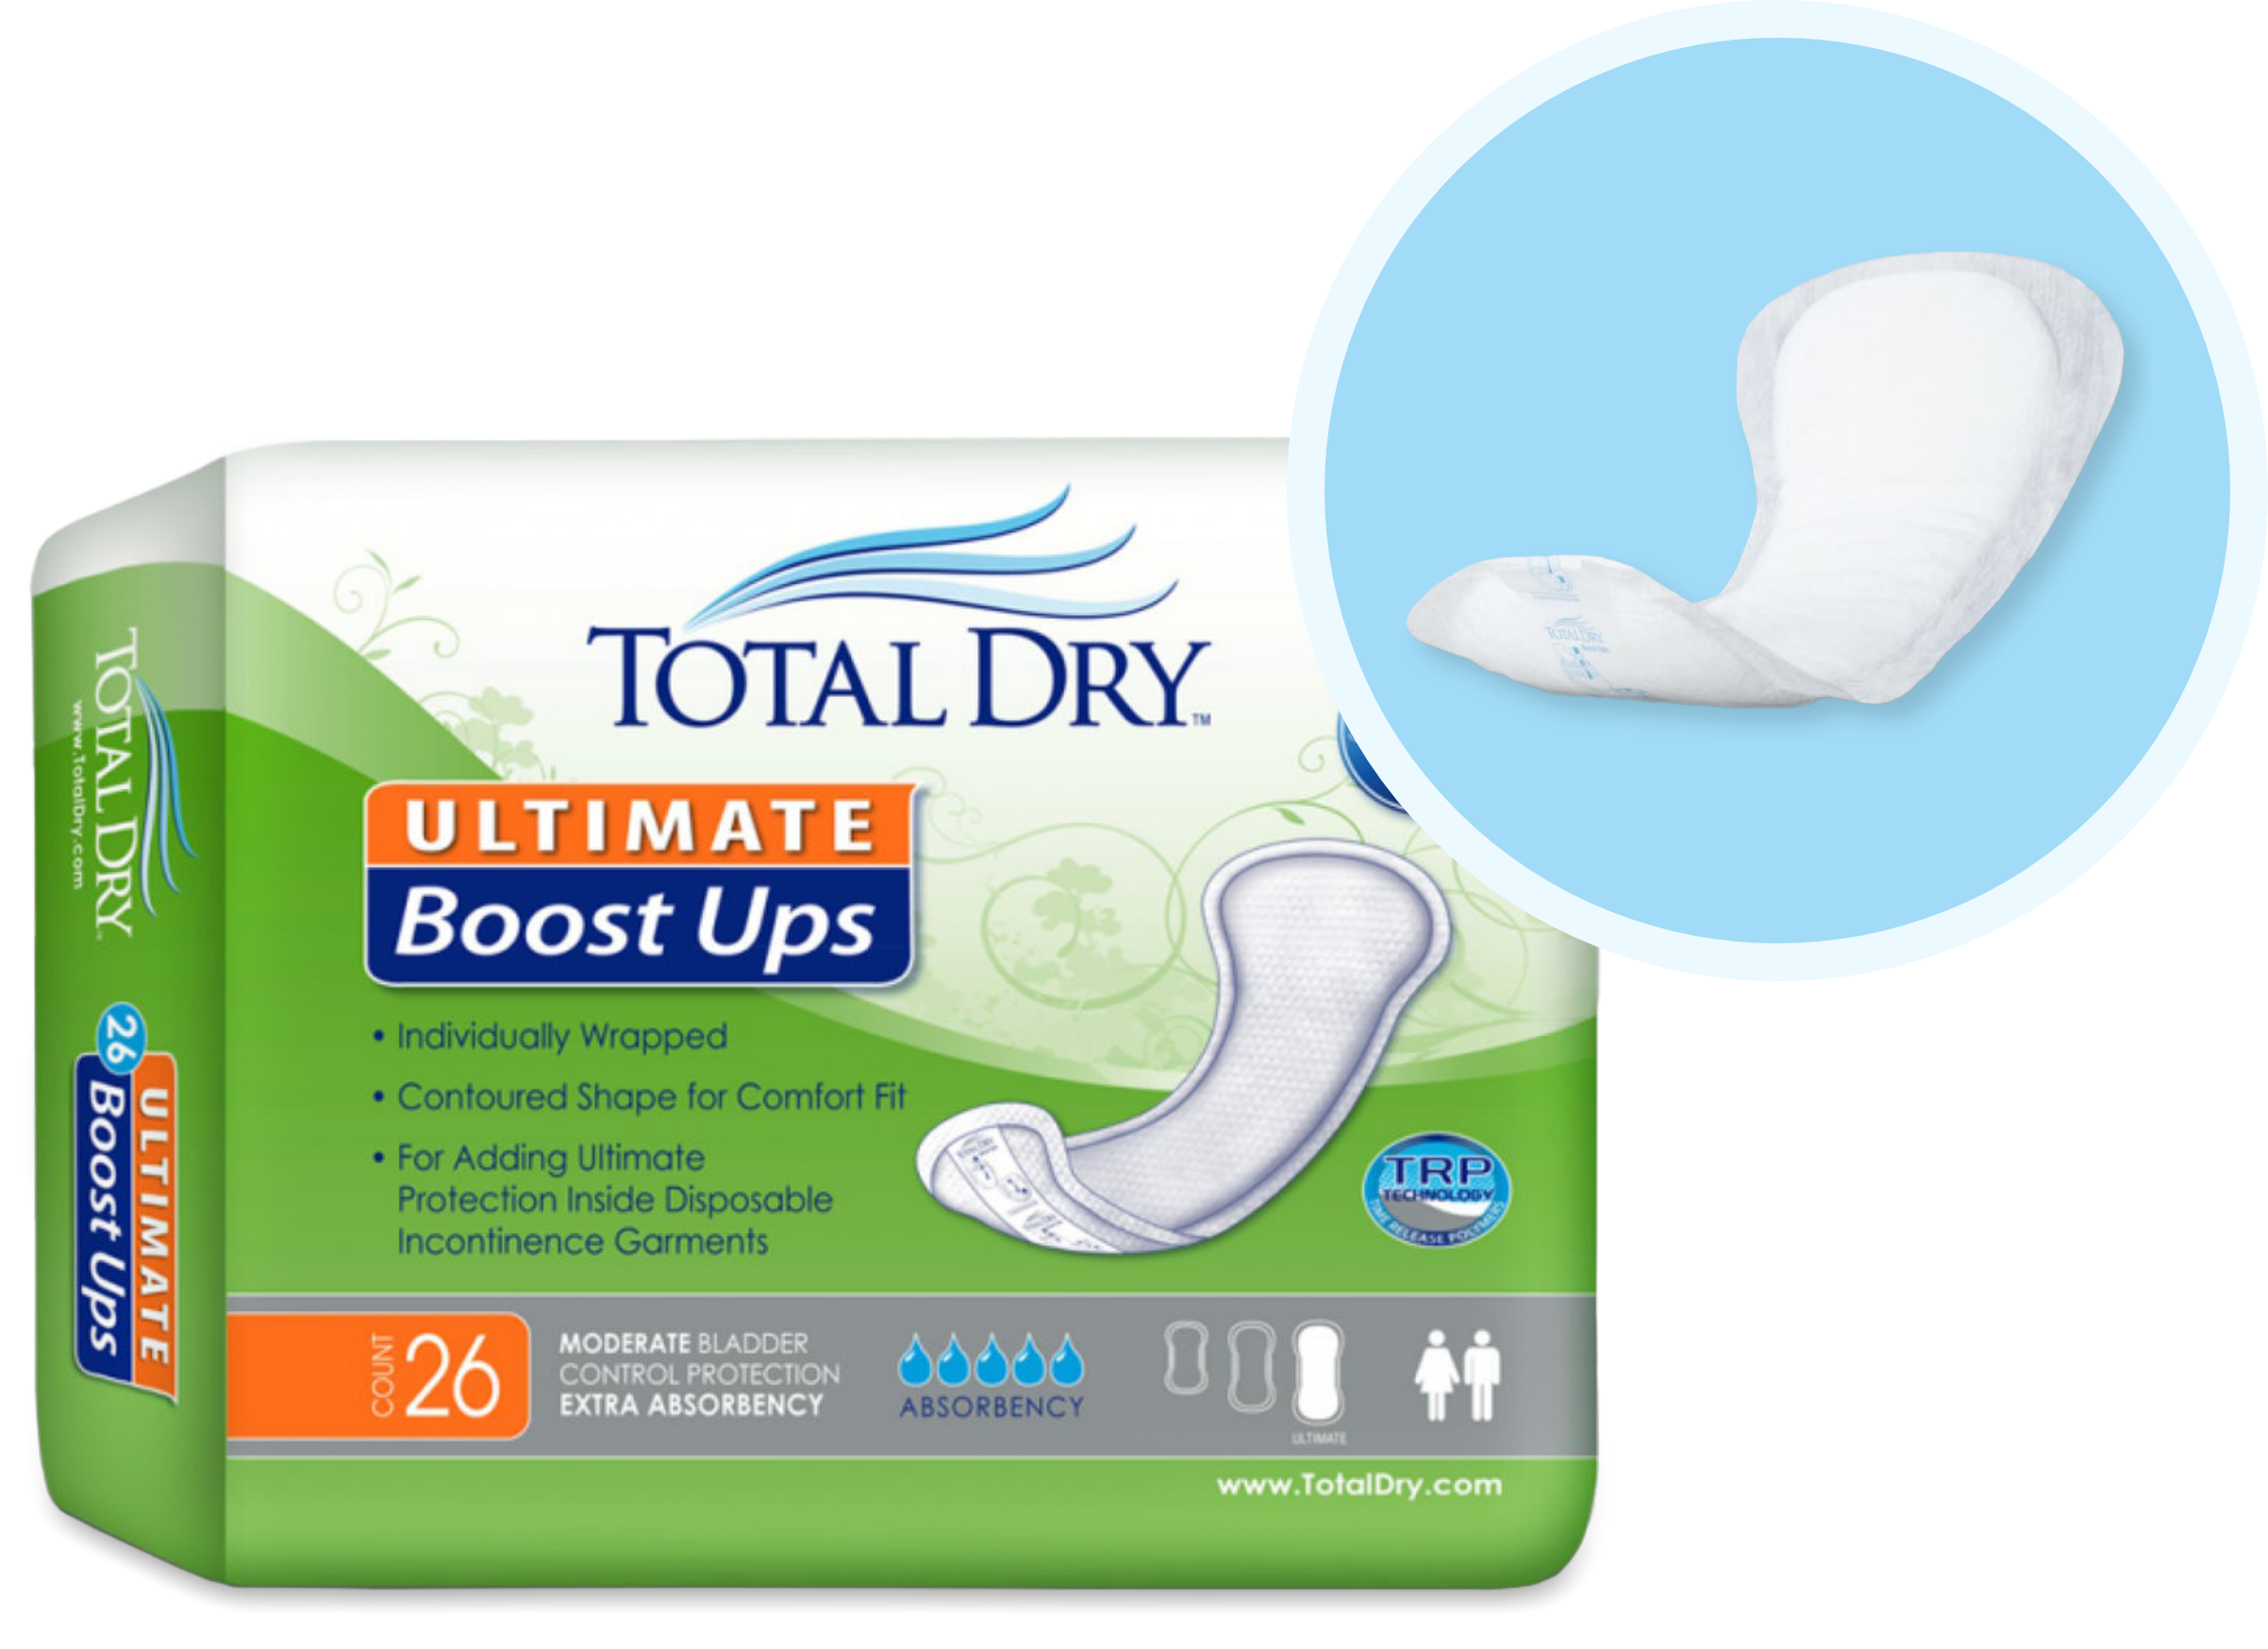 Ultimate Boost Ups - TotalDry